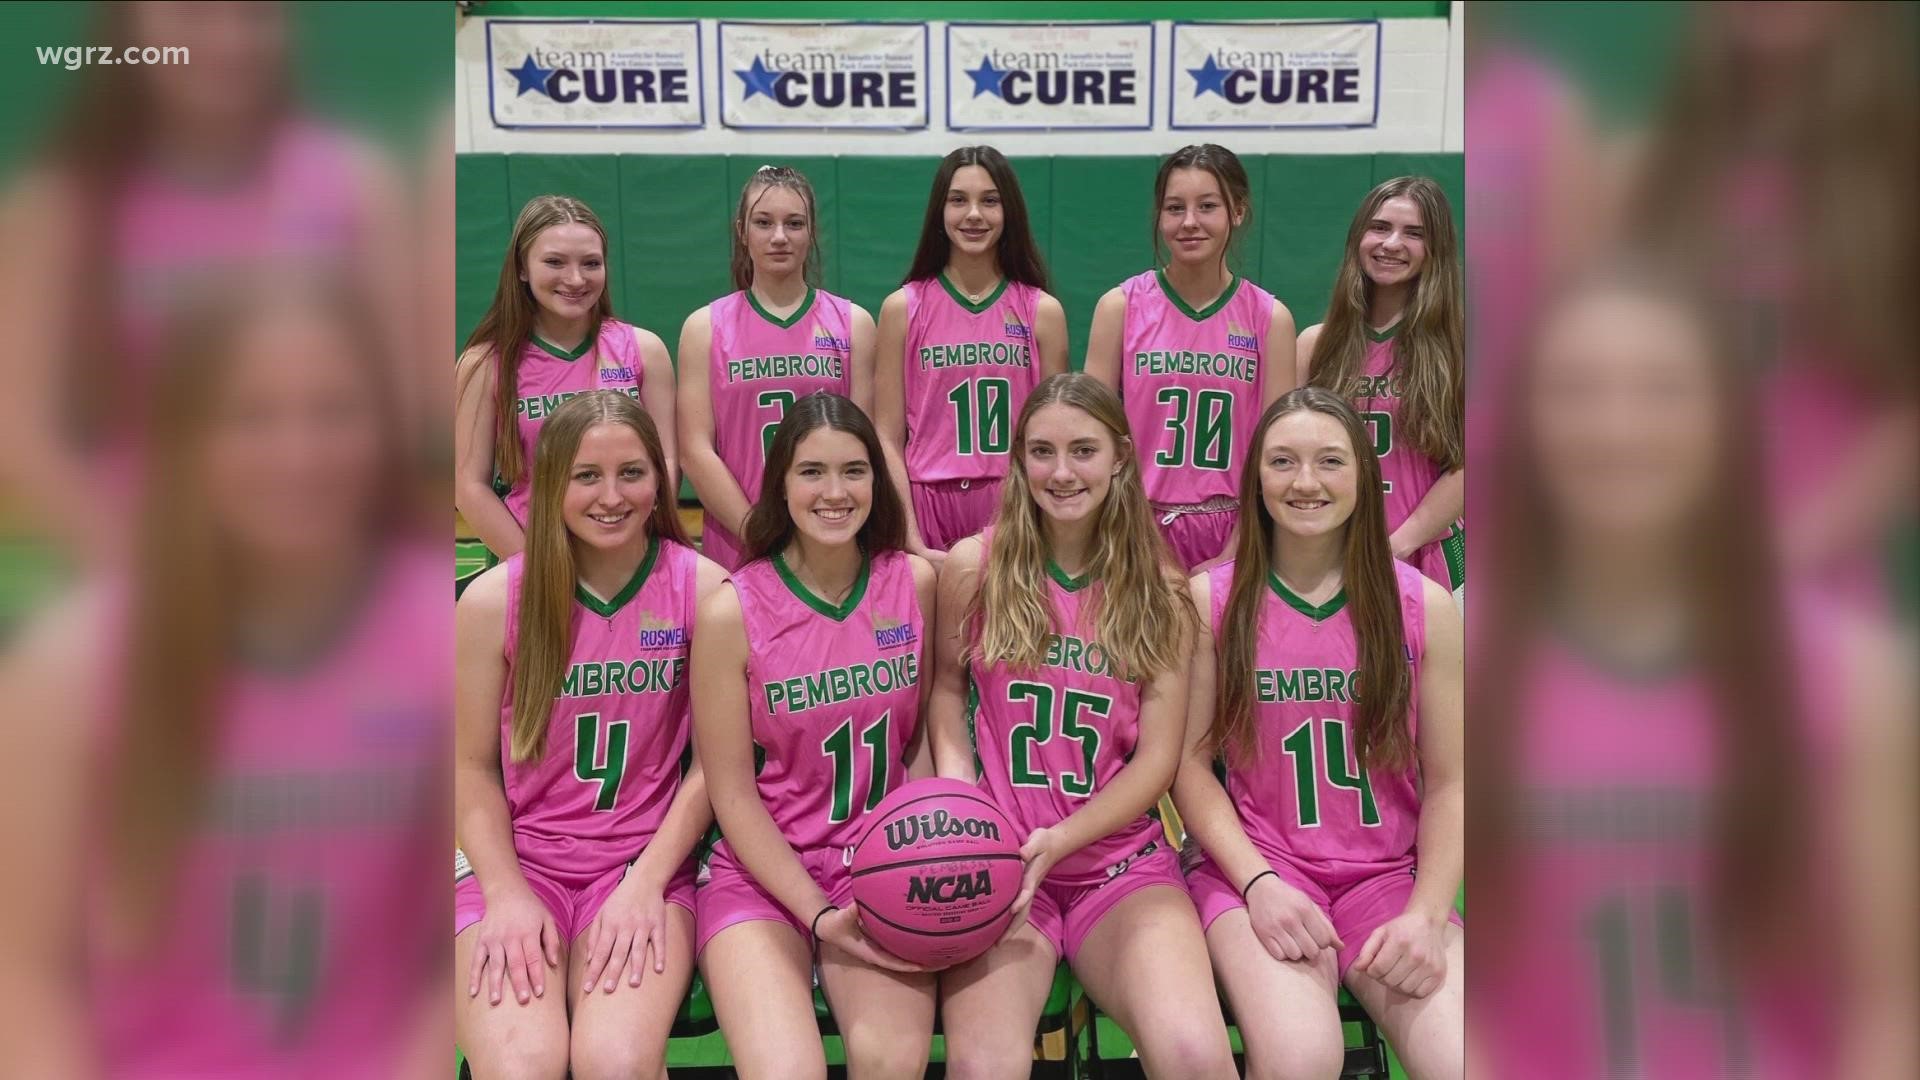 The Pembroke Girls Basketball team will tip off later tonight for their 11th annual Shooting for a Cure game to raise cancer awareness and money for Roswell Park.